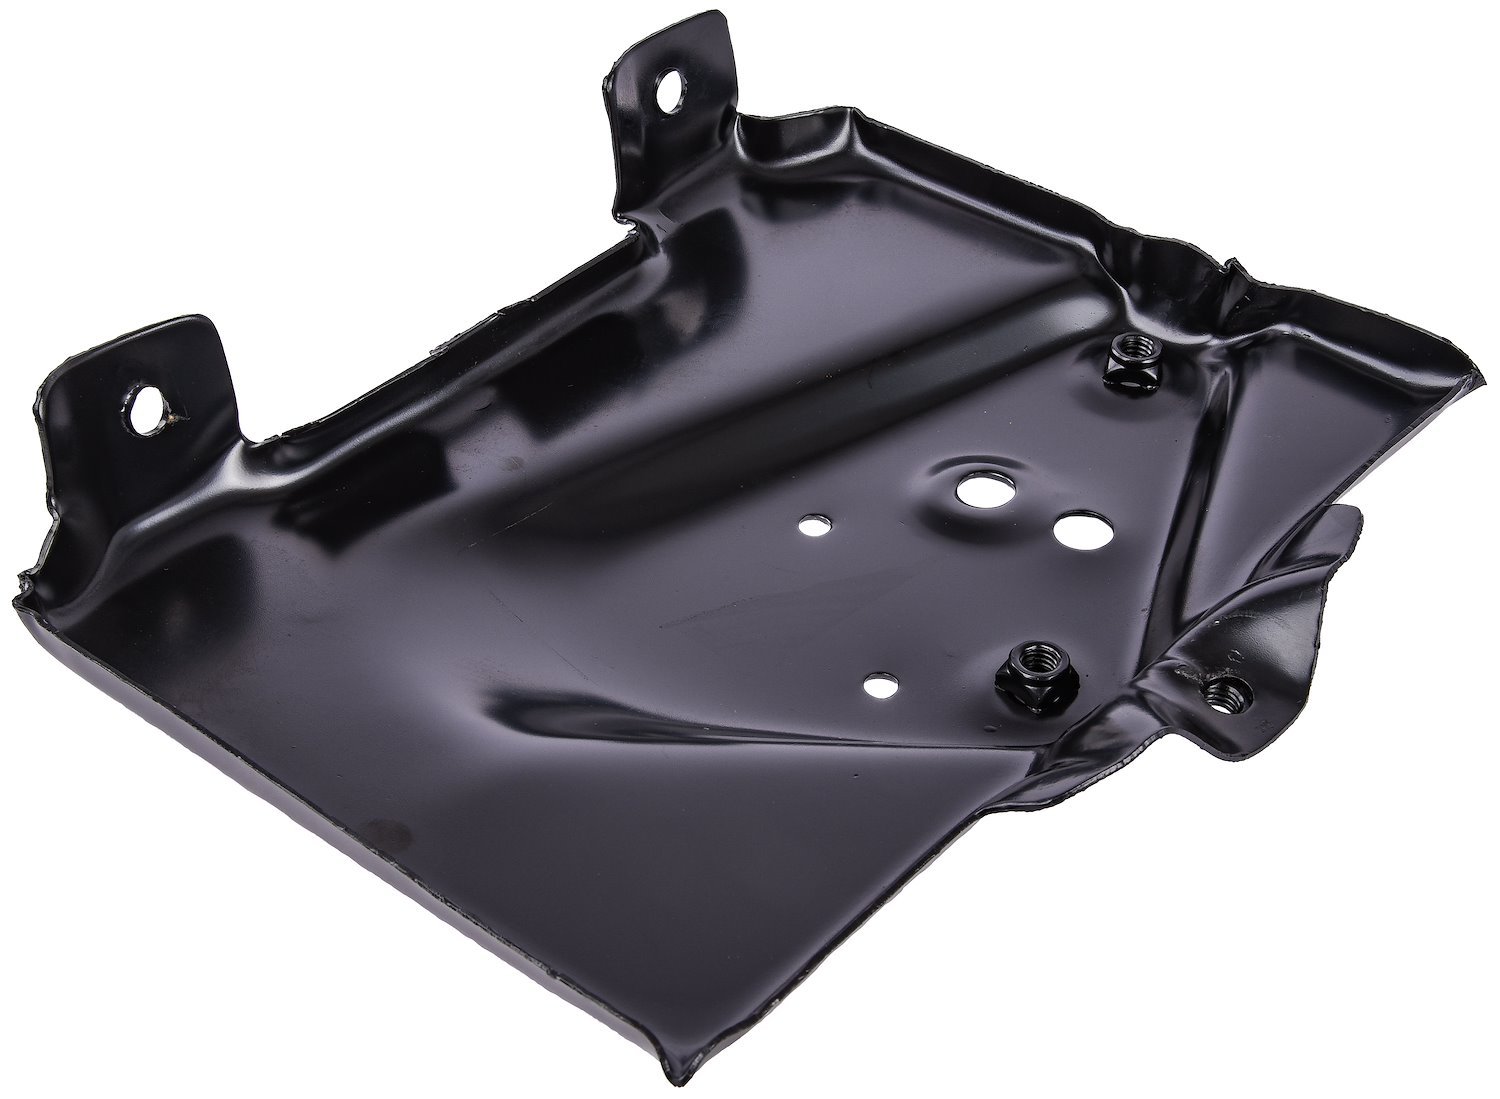 Battery Tray for 1966 Chevy Biscayne, Chevelle, Impala and 1967-1969 Chevy Camaro, Pontiac Firebird